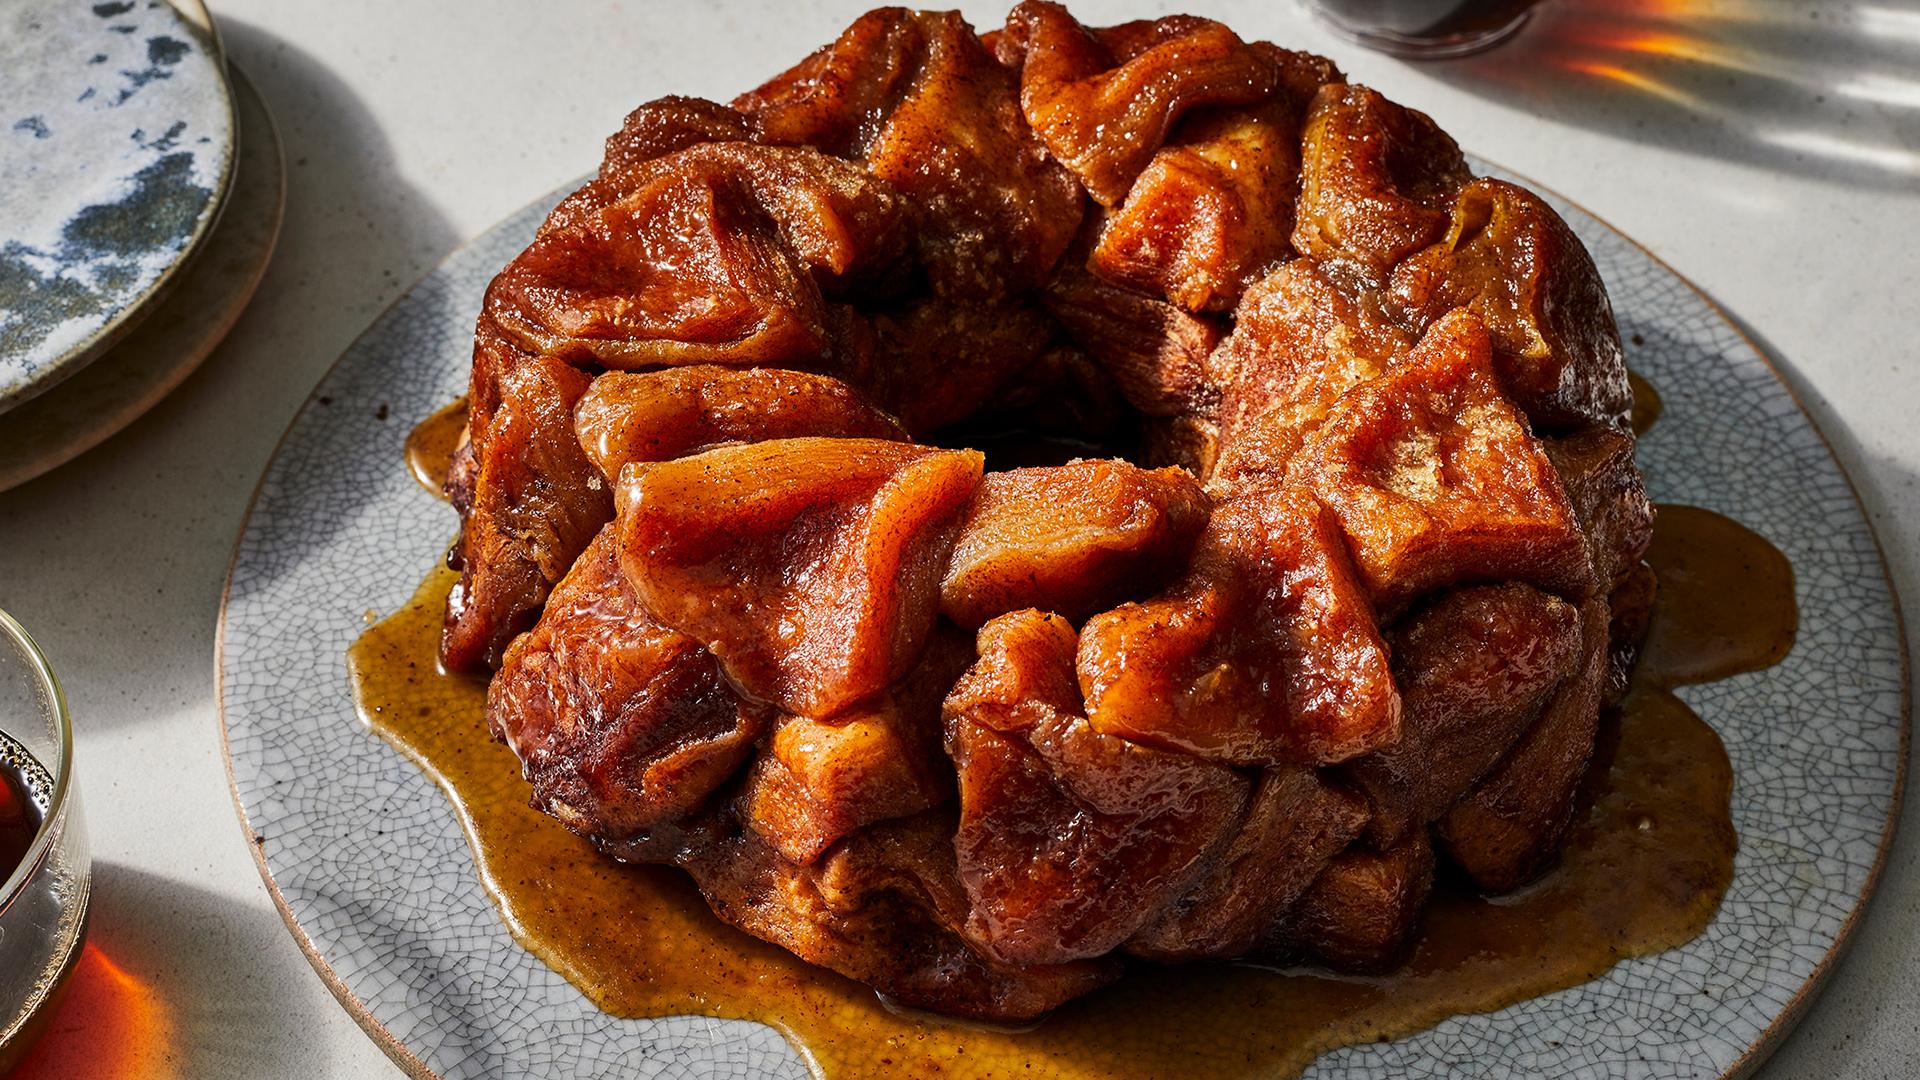 How to Make Instant Pot Monkey Bread